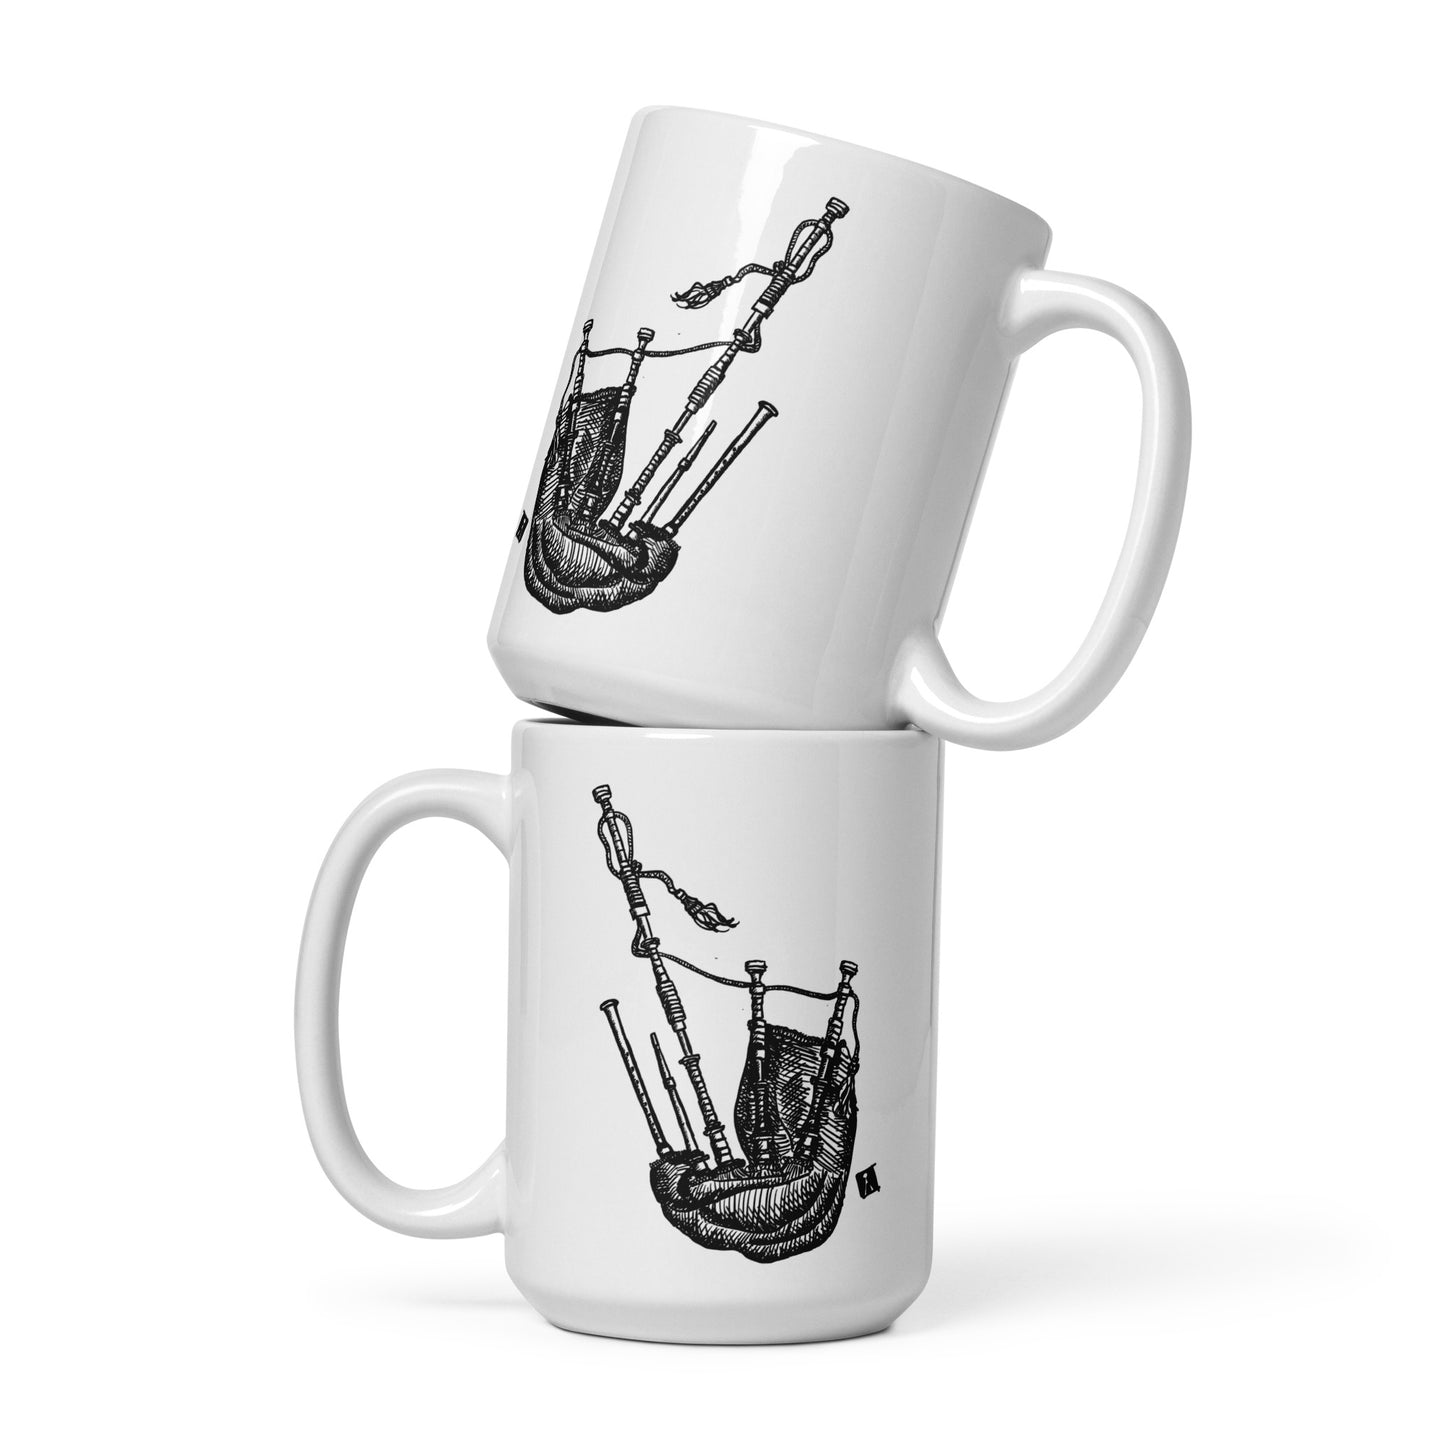 BellavanceInk: Coffee Mug With Pen And Ink Drawing Of Highland Bagpipes